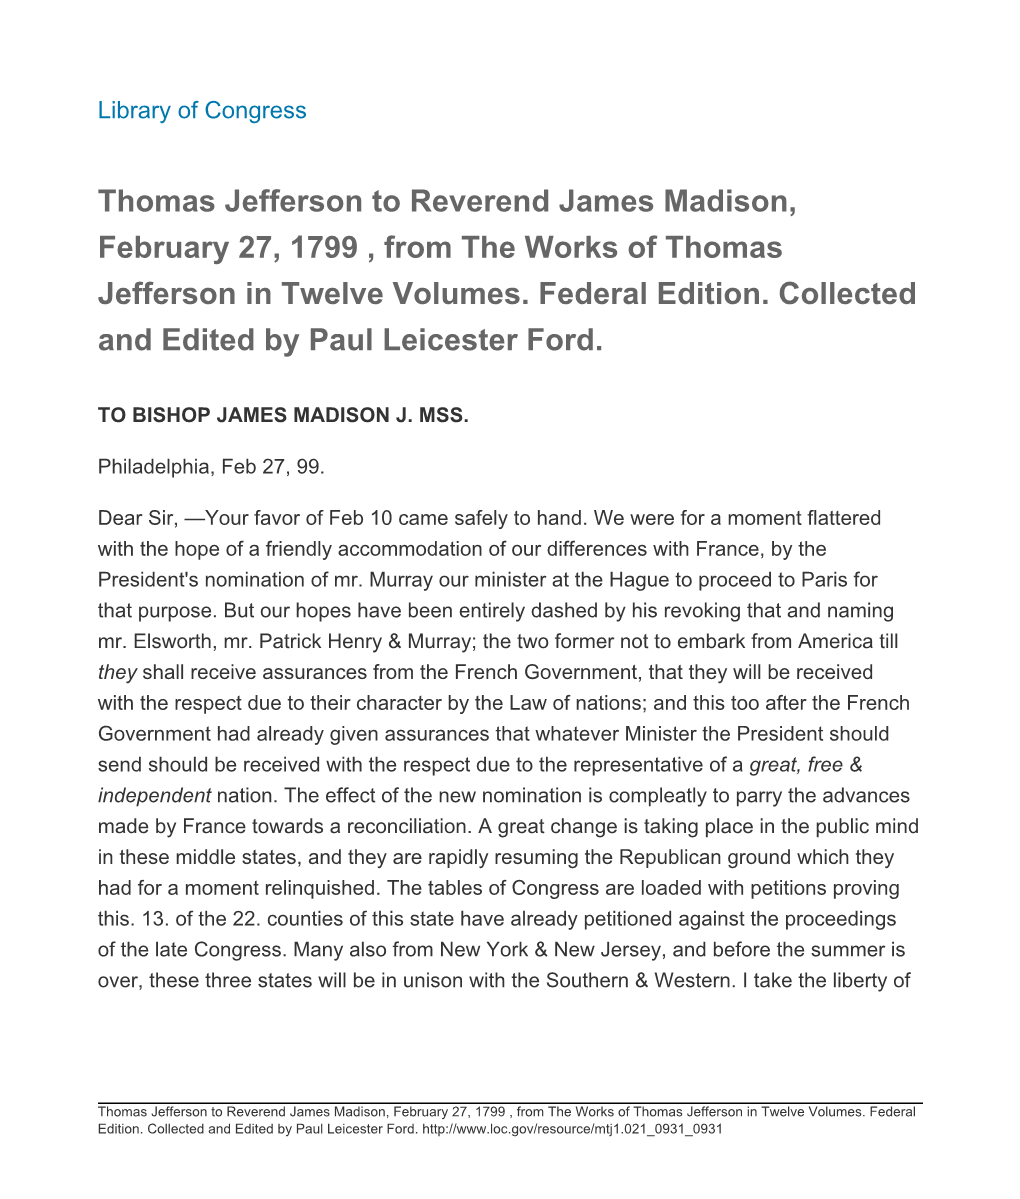 Thomas Jefferson to Reverend James Madison, February 27, 1799 , from the Works of Thomas Jefferson in Twelve Volumes